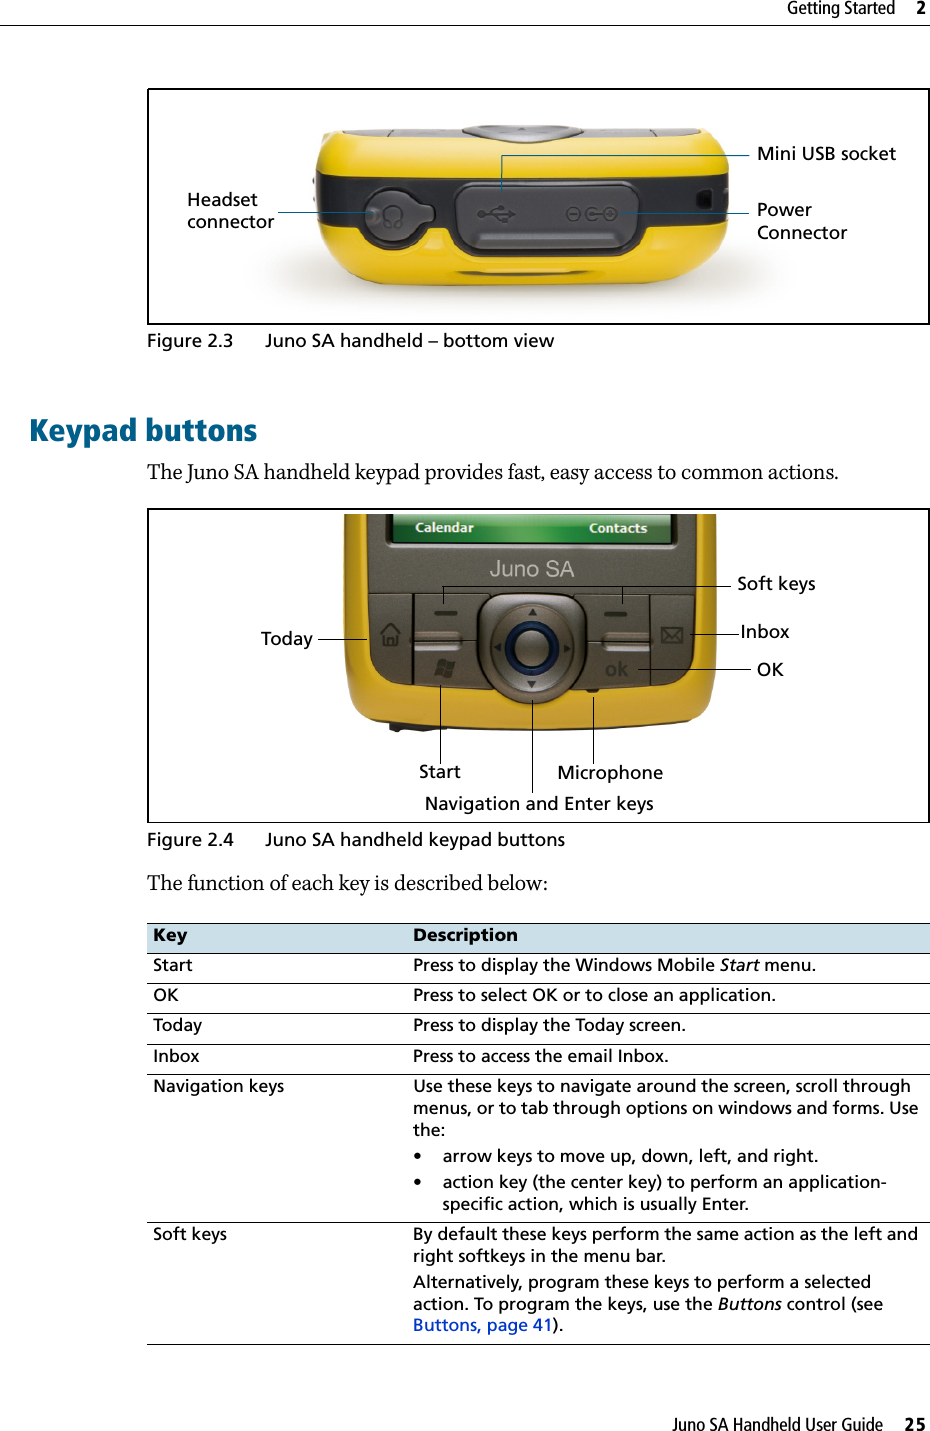 Juno SA Handheld User Guide     25Getting Started     2 Figure 2.3 Juno SA handheld – bottom viewKeypad buttonsThe Juno SA handheld keypad provides fast, easy access to common actions.  Figure 2.4 Juno SA handheld keypad buttonsThe function of each key is described below:Key DescriptionStart Press to display the Windows Mobile Start menu.OK Press to select OK or to close an application.Today Press to display the Today screen.Inbox Press to access the email Inbox.Navigation keys Use these keys to navigate around the screen, scroll through menus, or to tab through options on windows and forms. Use the:• arrow keys to move up, down, left, and right.• action key (the center key) to perform an application-specific action, which is usually Enter.Soft keys By default these keys perform the same action as the left and right softkeys in the menu bar.Alternatively, program these keys to perform a selected action. To program the keys, use the Buttons control (see Buttons, page 41).PowerMini USB socketHeadsetconnector ConnectorSoft keysInboxOKMicrophoneStartTodayNavigation and Enter keys